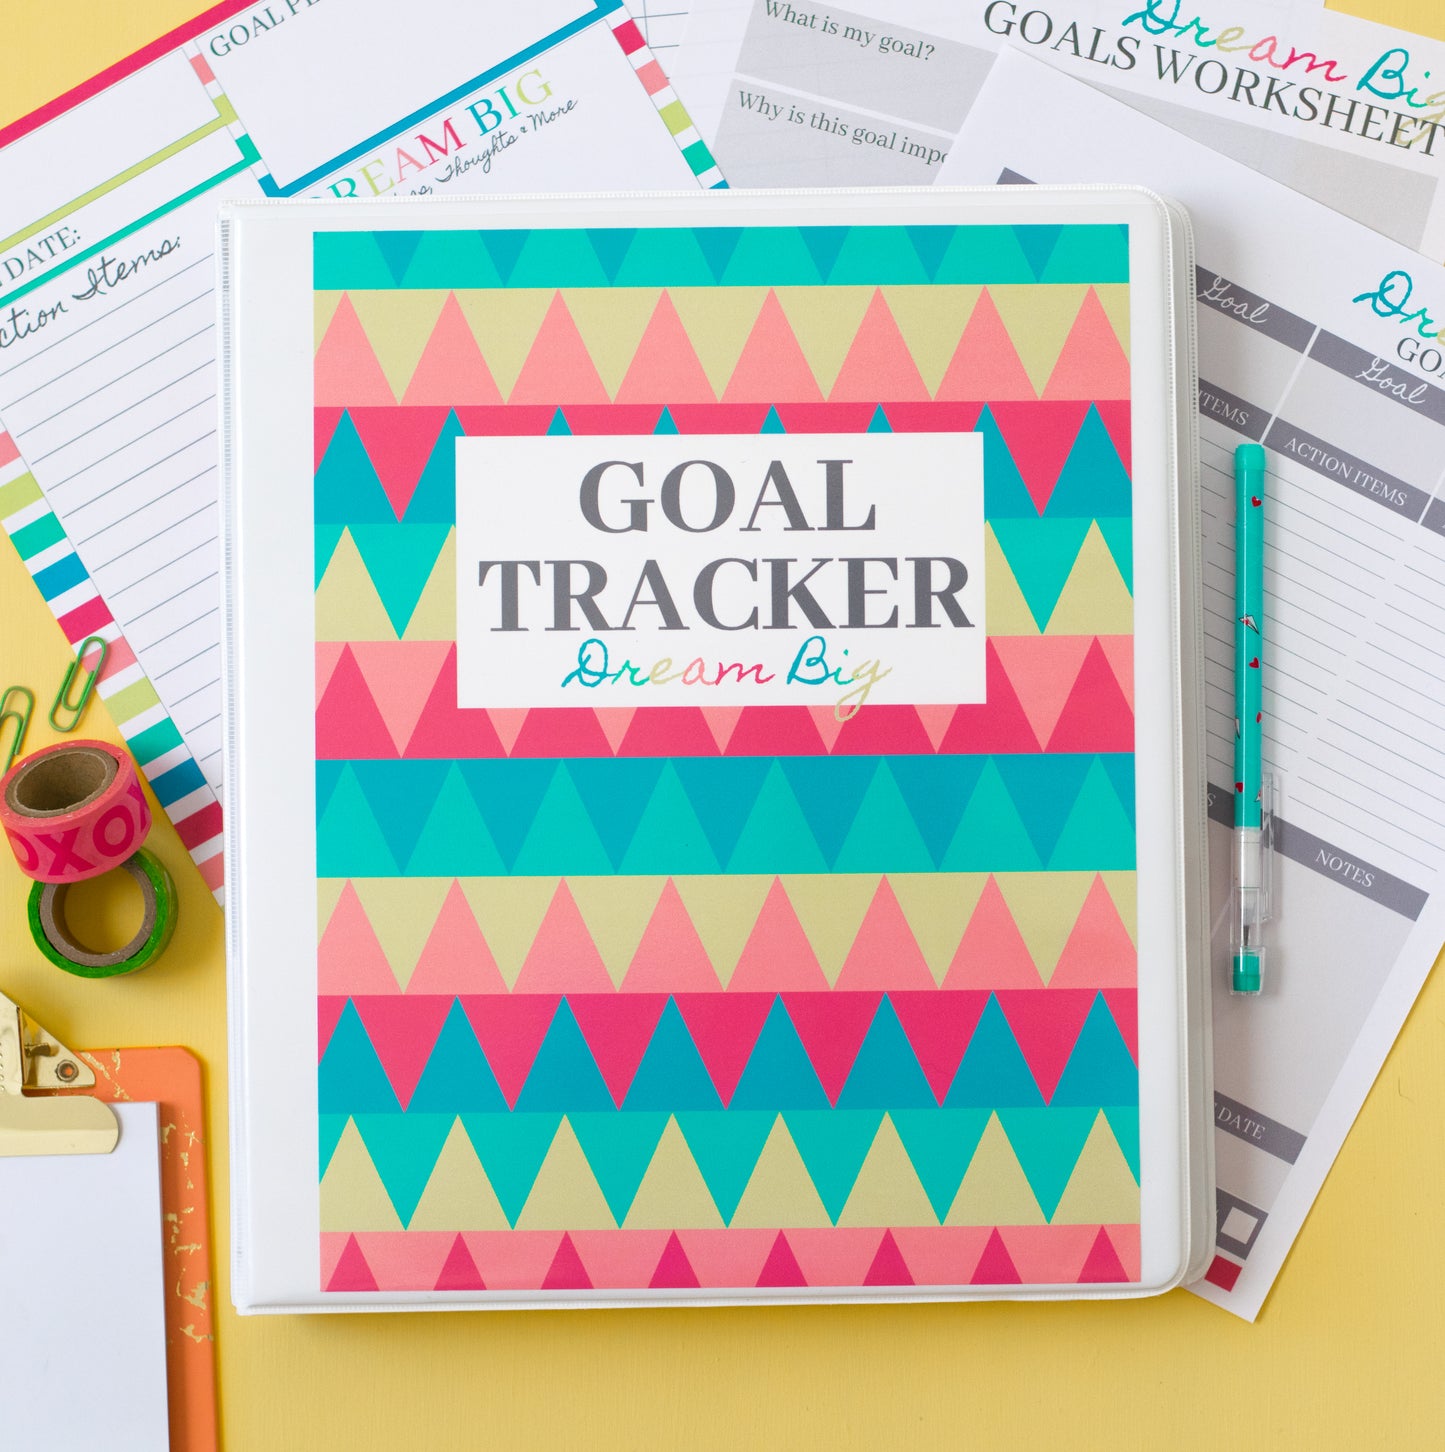 Printable Goal Planning Pages